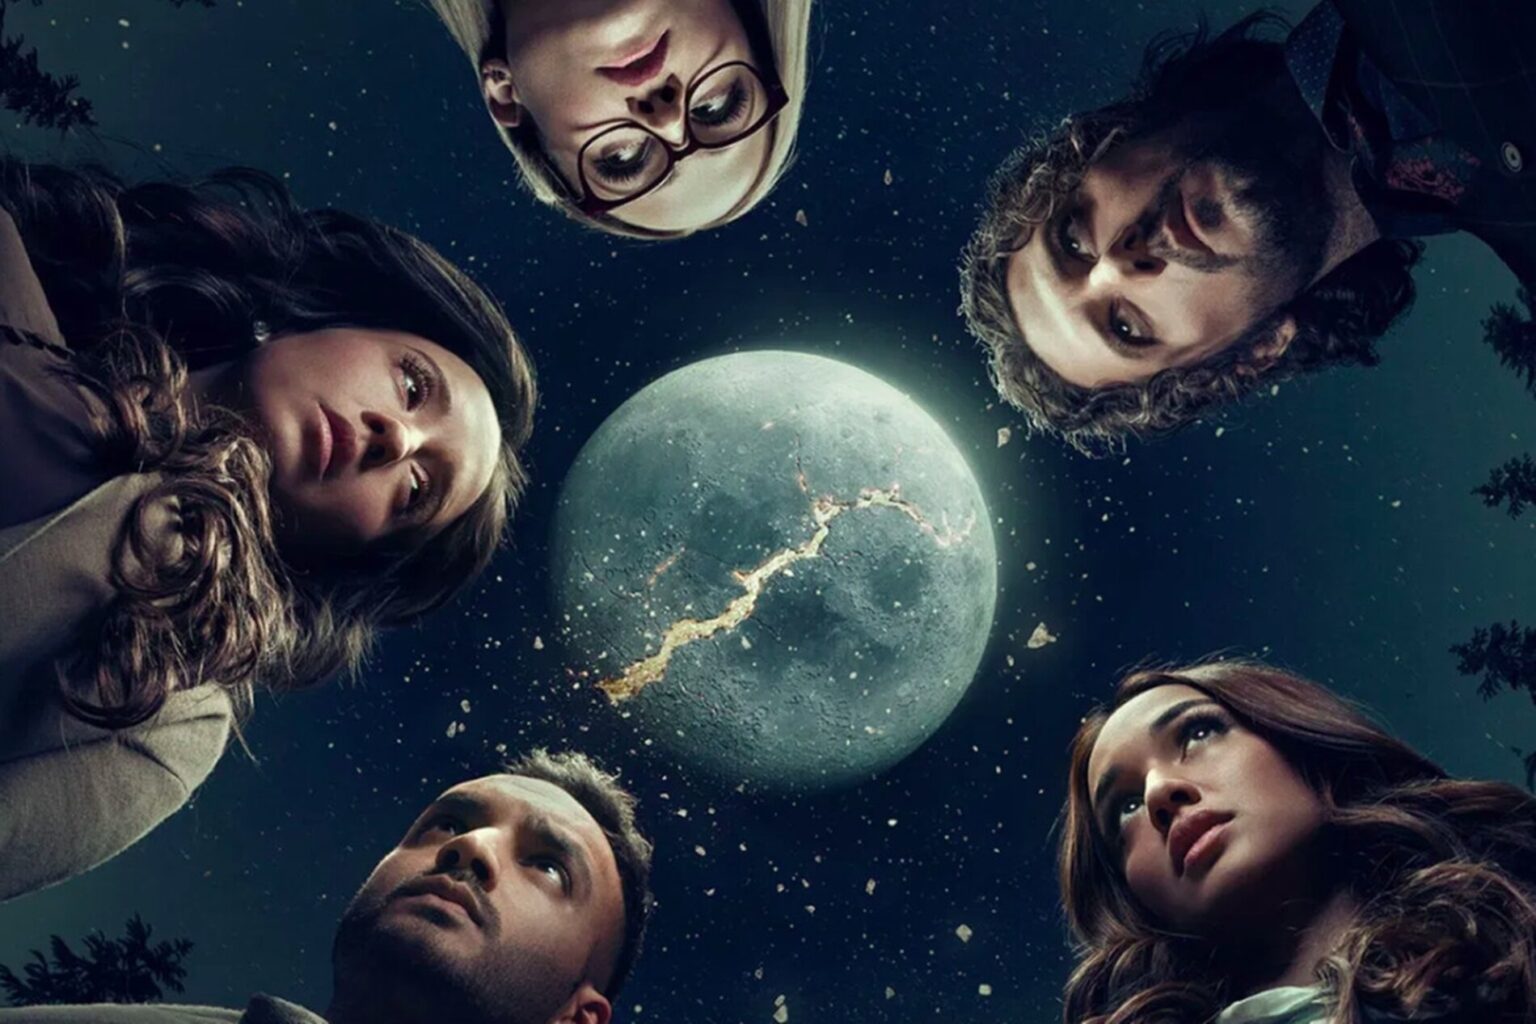 Those who have yet to fall for 'The Magicians': hear our surge of glittering accolades. Let's explain that season 5 finale.